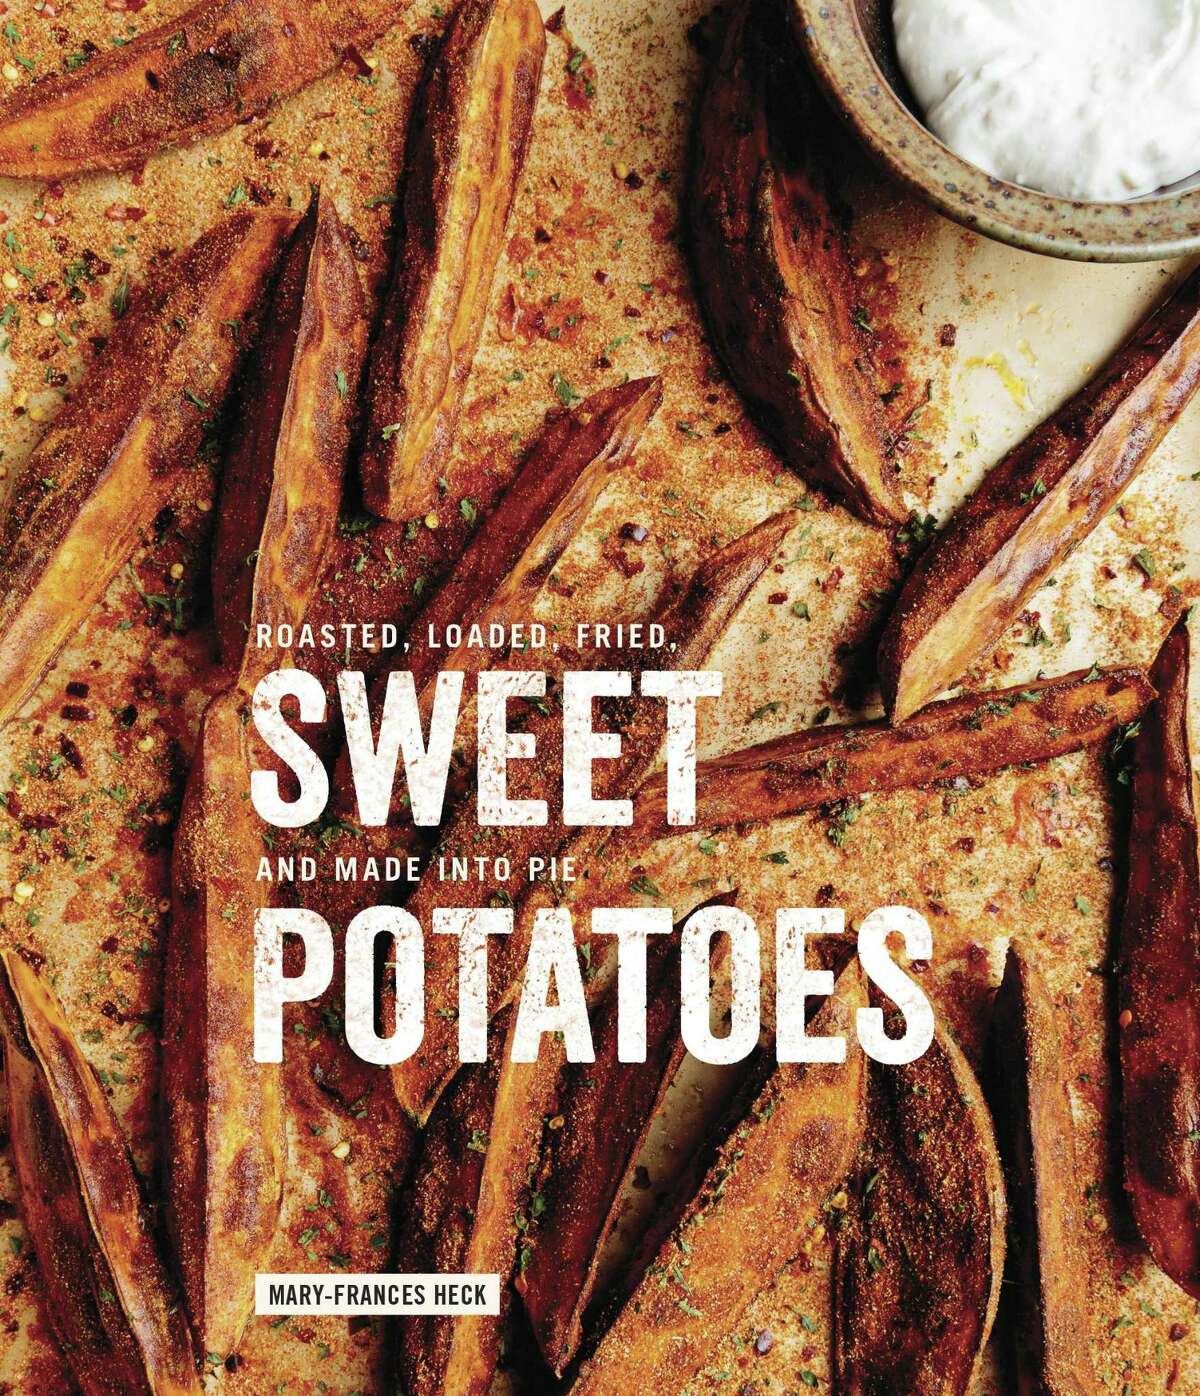 “Sweet Potatoes” book. Reprinted from Sweet Potatoes. Copyright © 2017 by Mary-Frances Heck. Photographs copyright © 2017 by Kristin Teig. Published by Clarkson Potter/Publishers, an imprint of Penguin Random House, LLC.